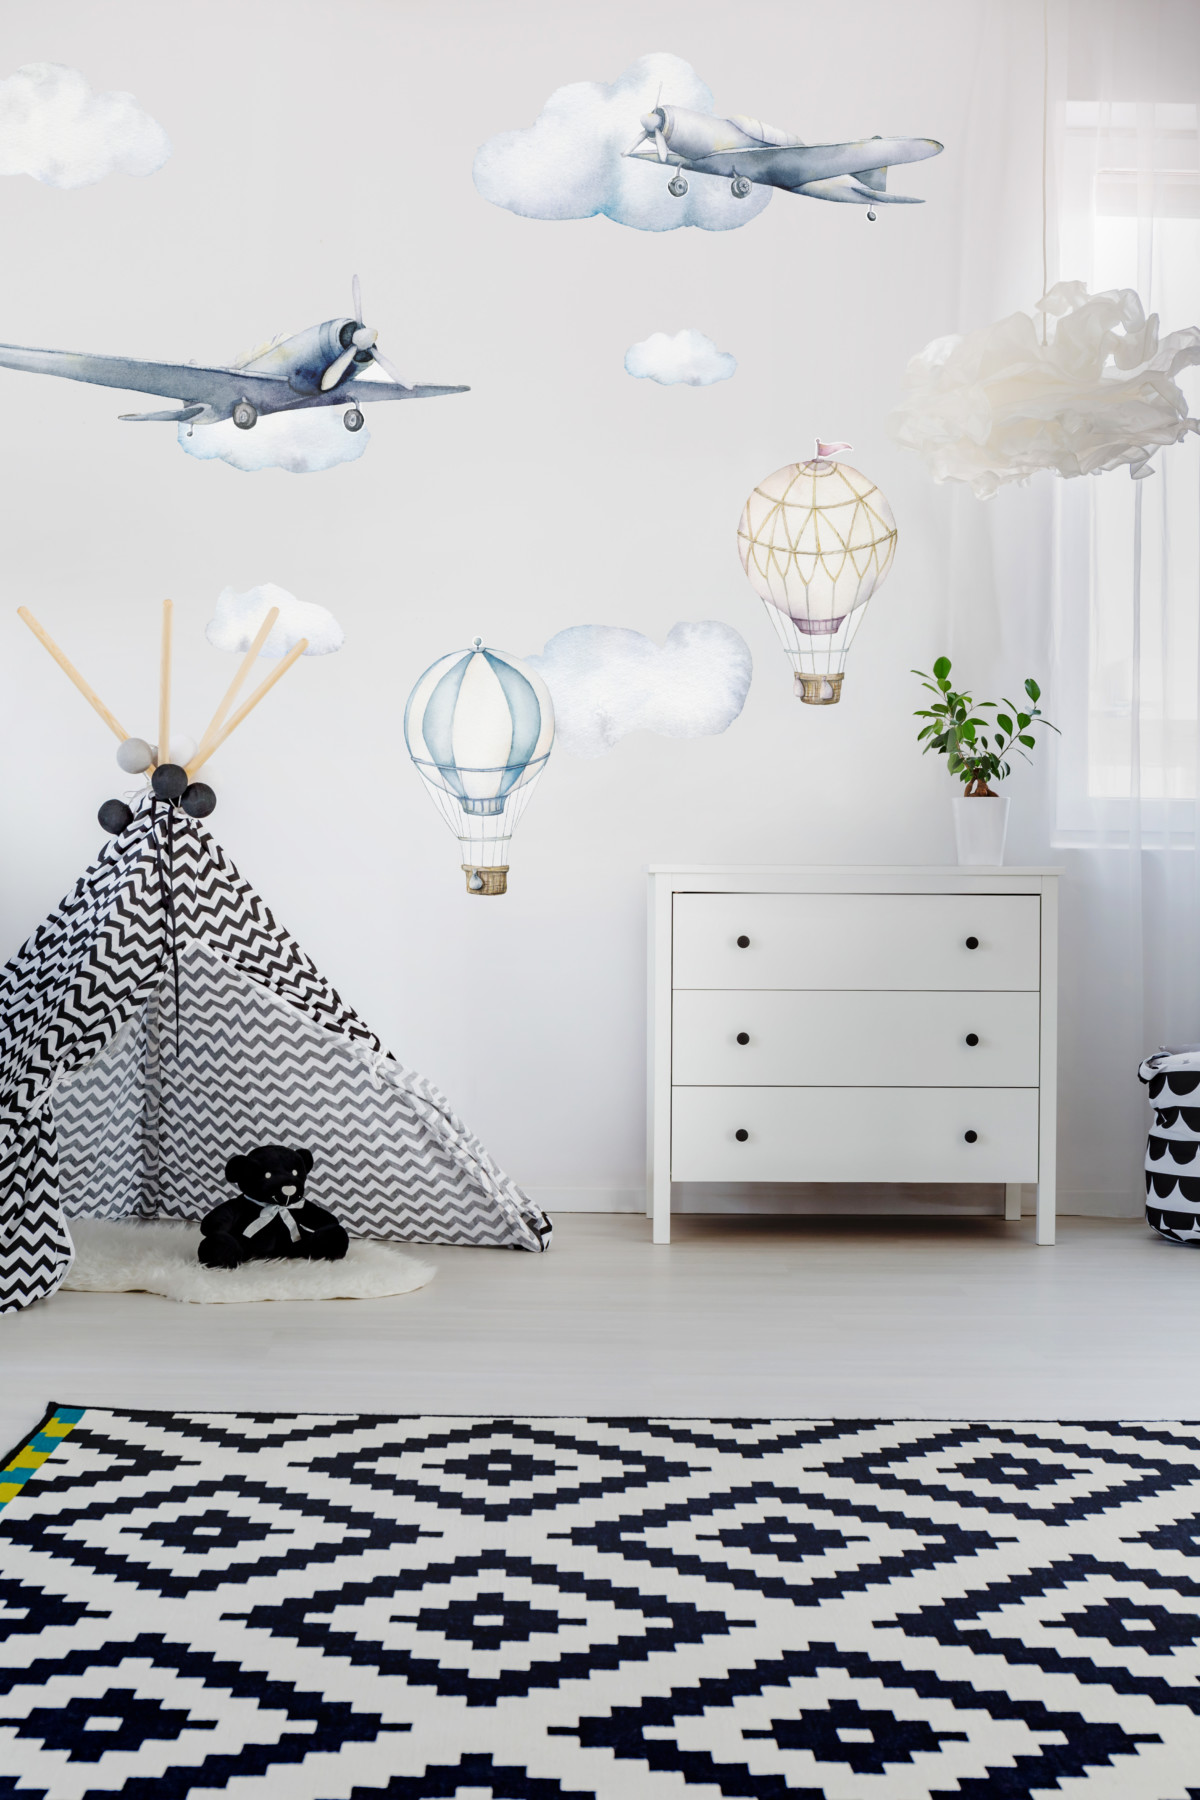 Up in the air | Kids Wall Decals